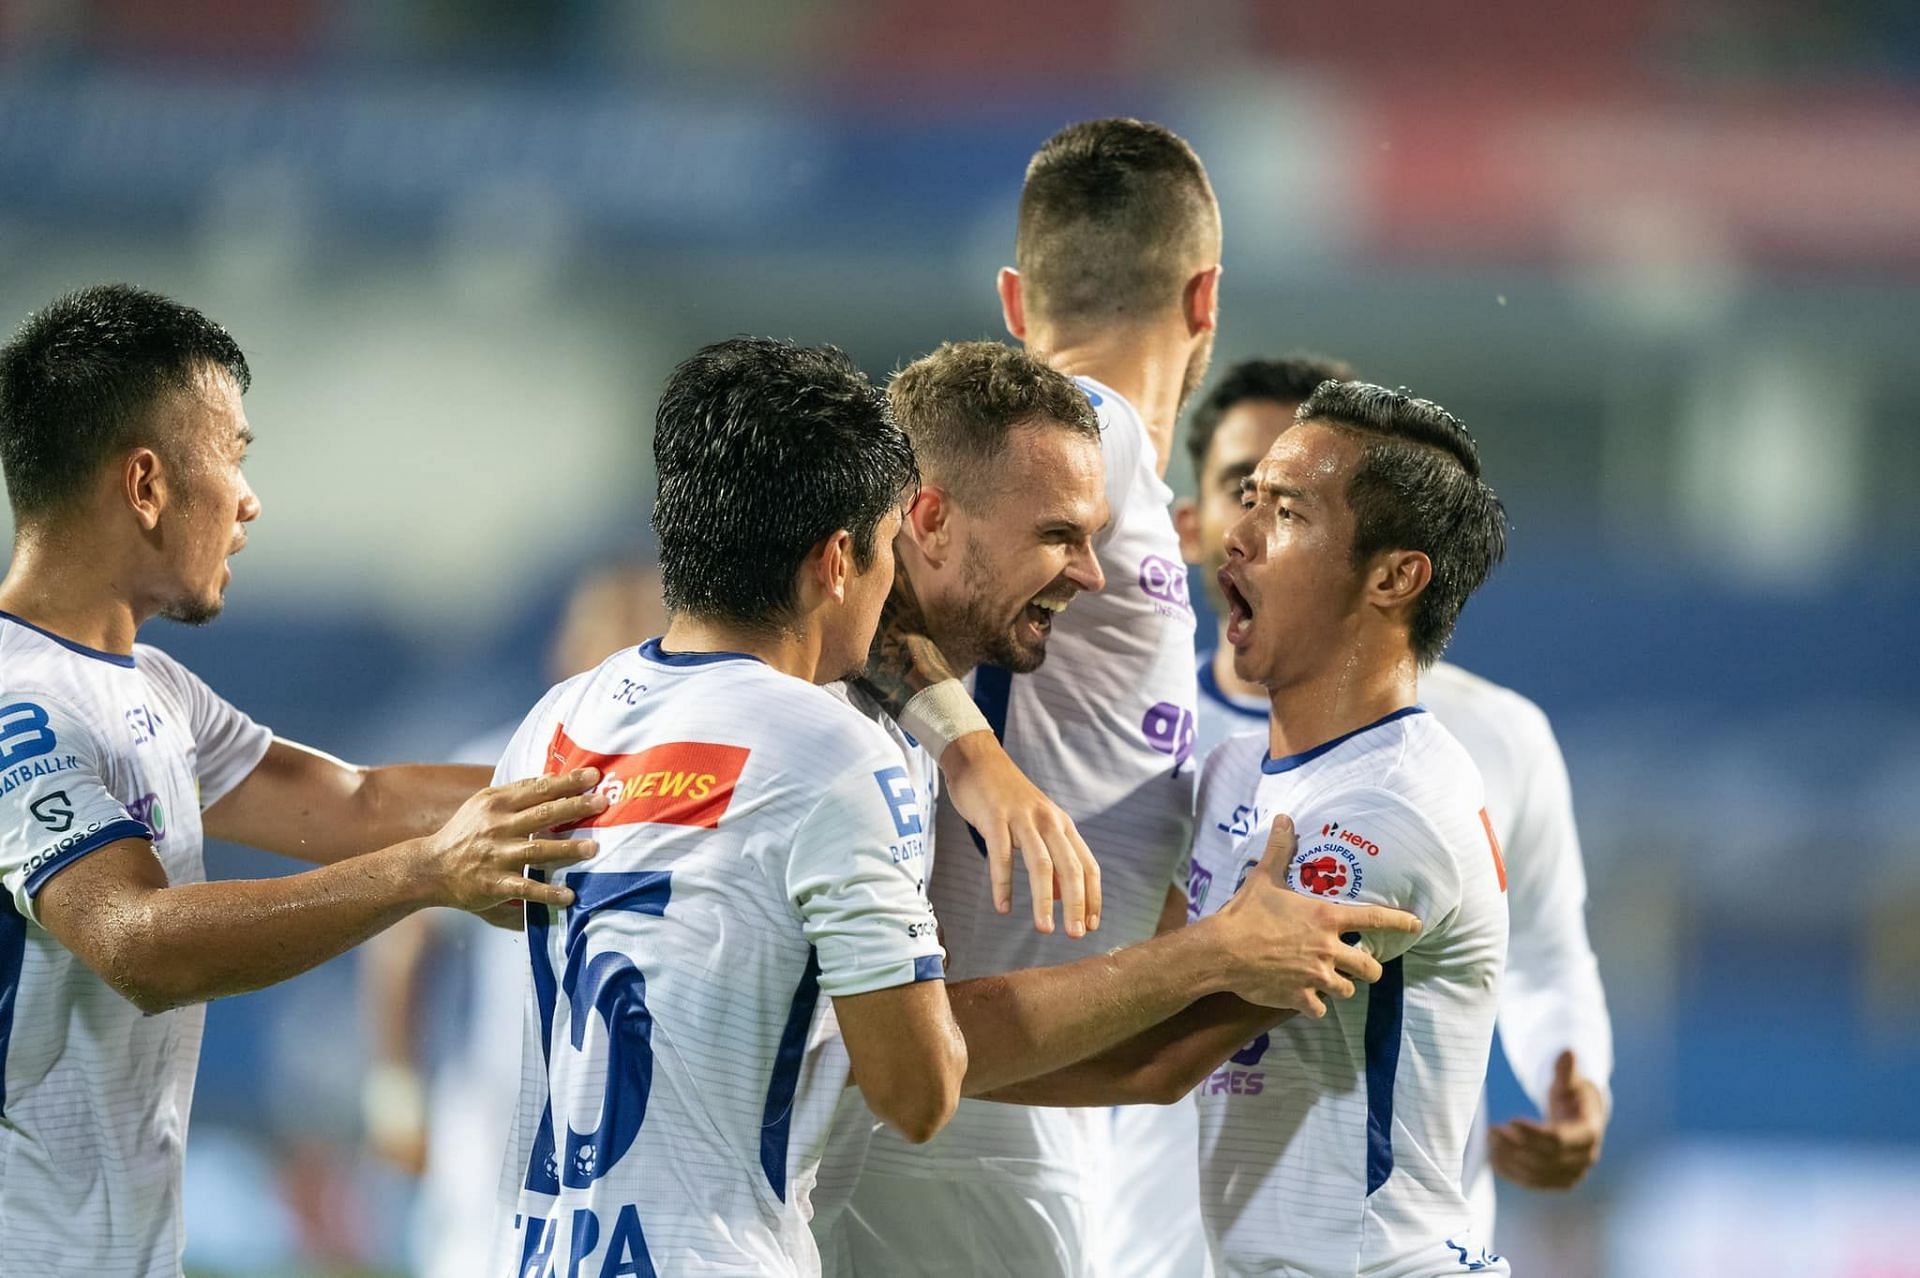 Chennaiyin FC remained the only unbeaten side in the league this season (Image courtesy: ISL social media)